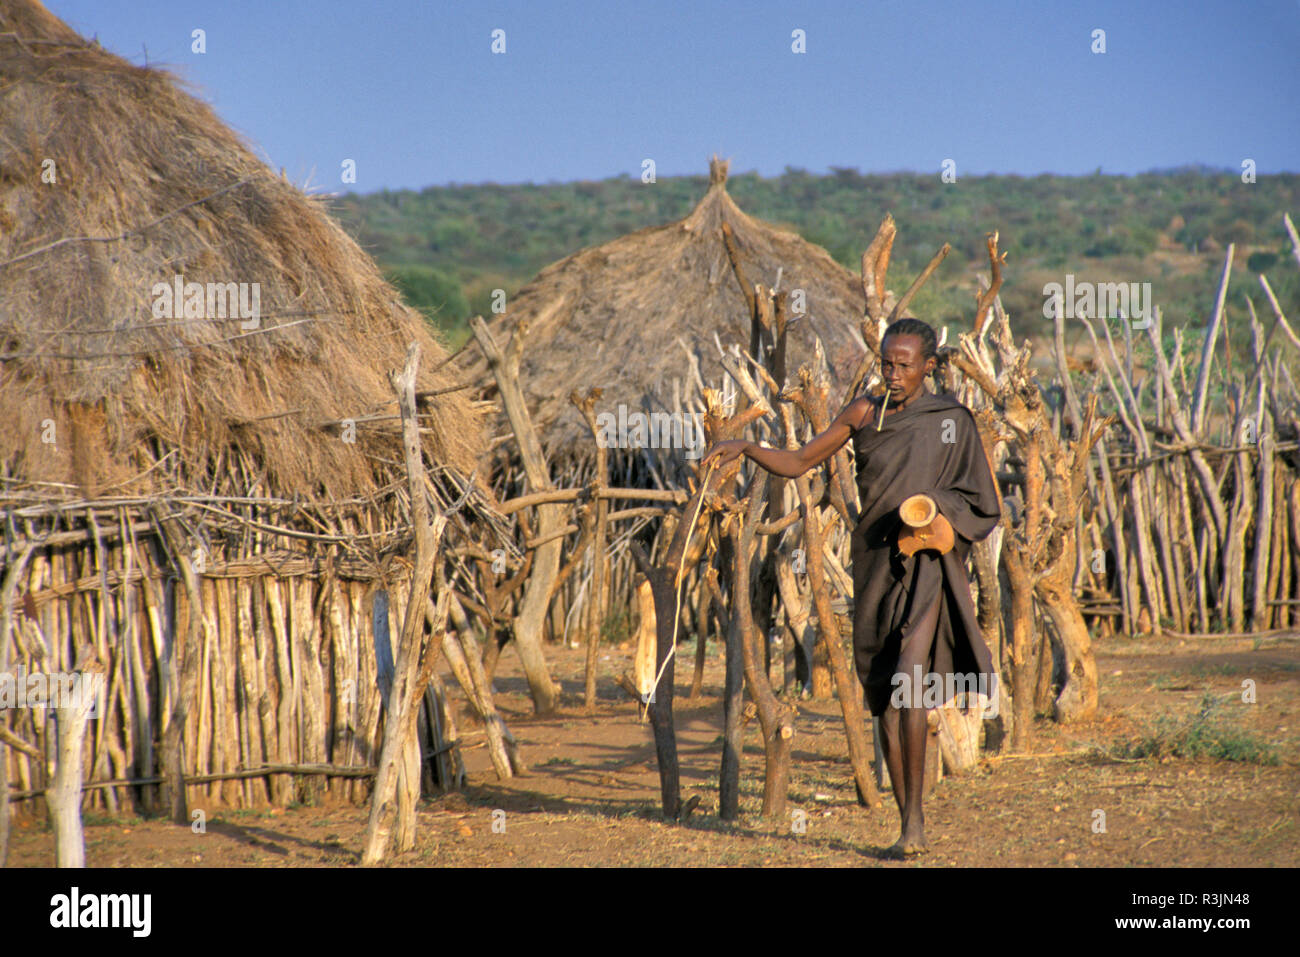 Africa, Ethiopia, Omo region. A Hamar tribe man with his portable wooden stool walks along a stick fence and thatched-roof village huts. (MR) Stock Photo